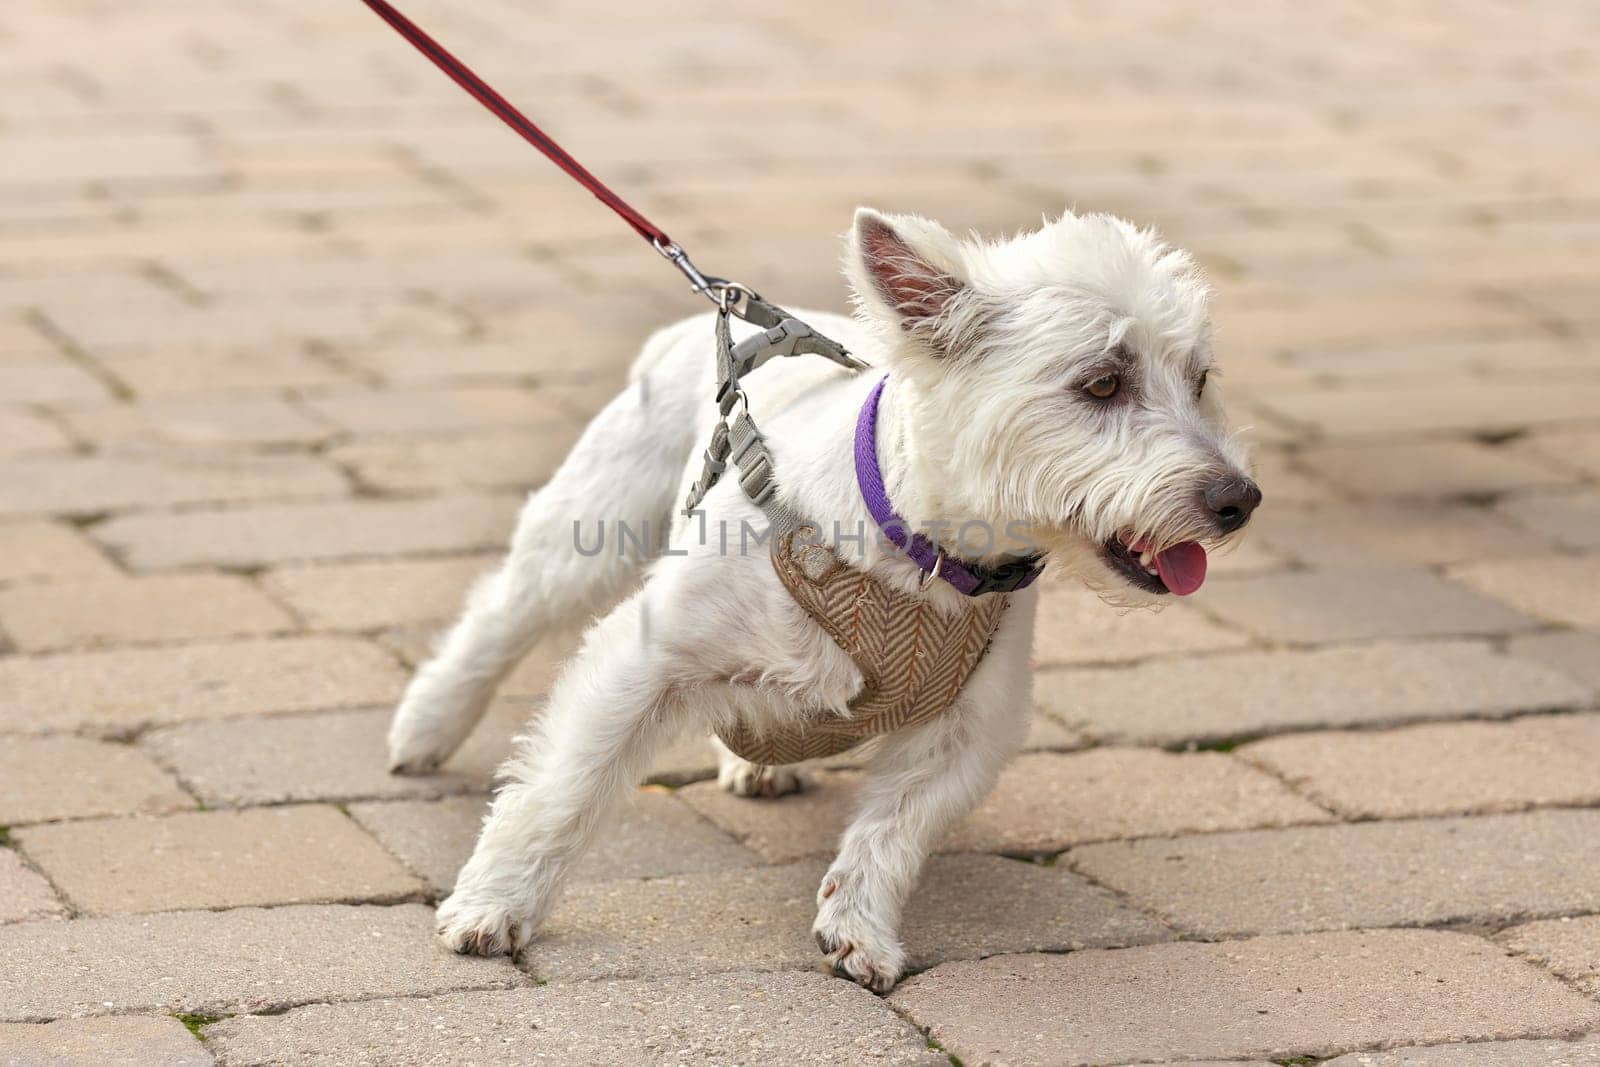 West highland white terrier Tugging Excitedly on a leash trying to Go Sideways by markvandam